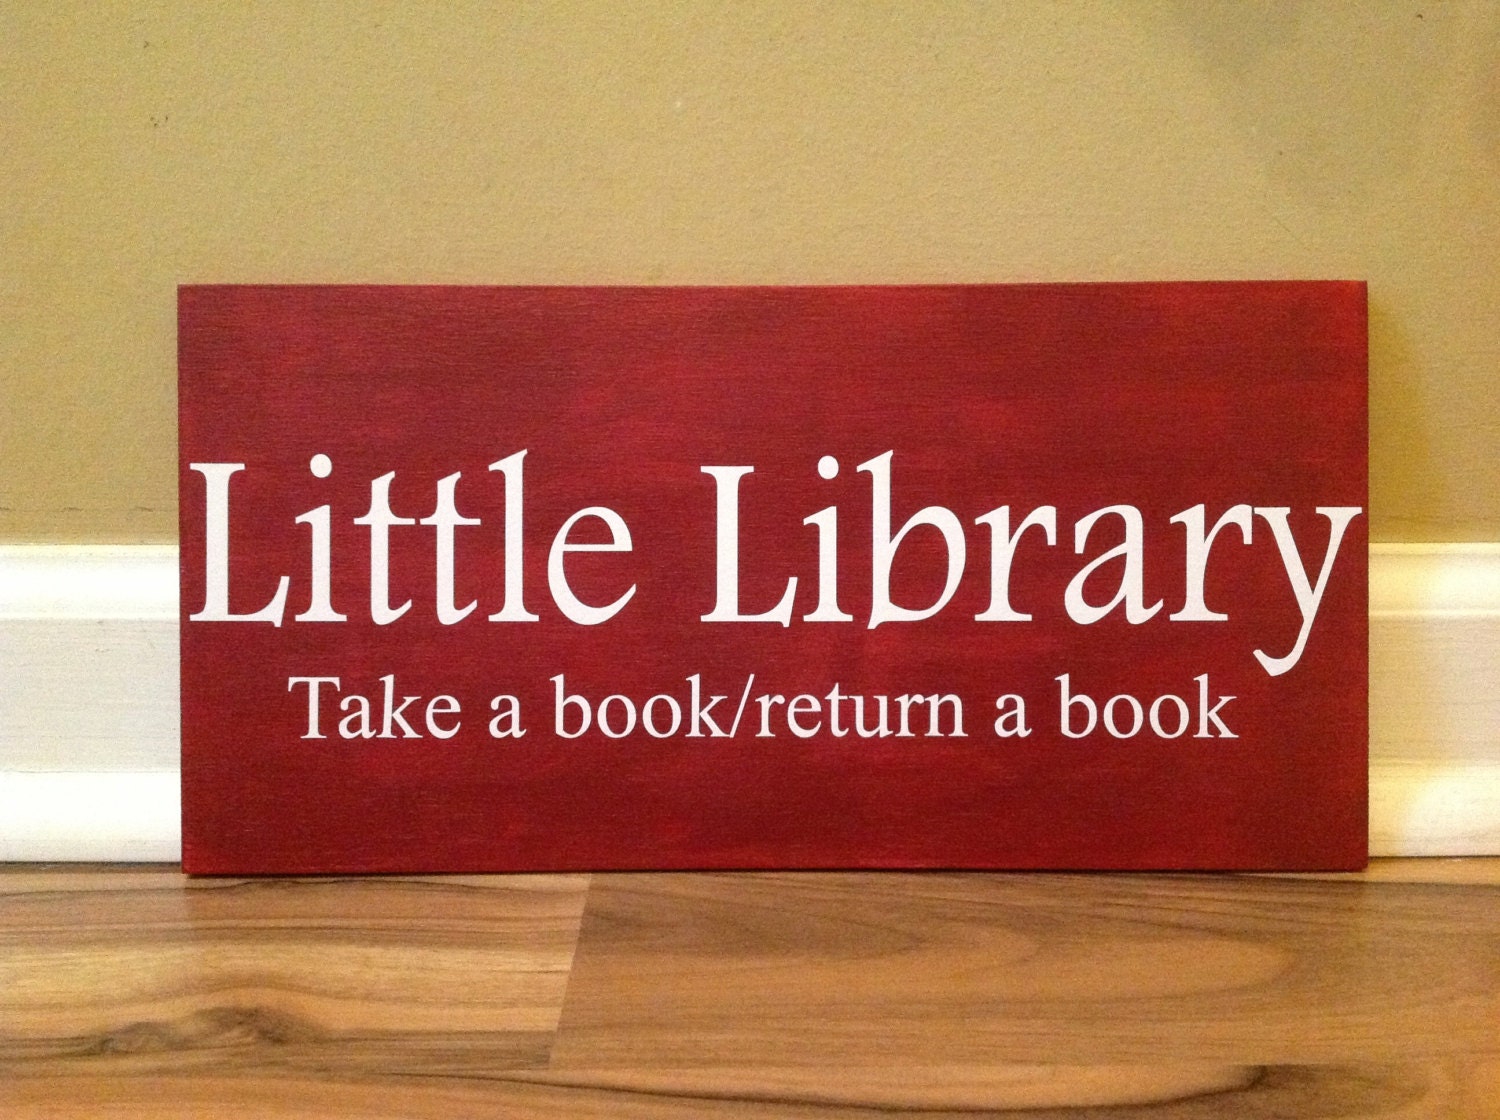 little-library-take-a-book-return-a-book-free-library-sign